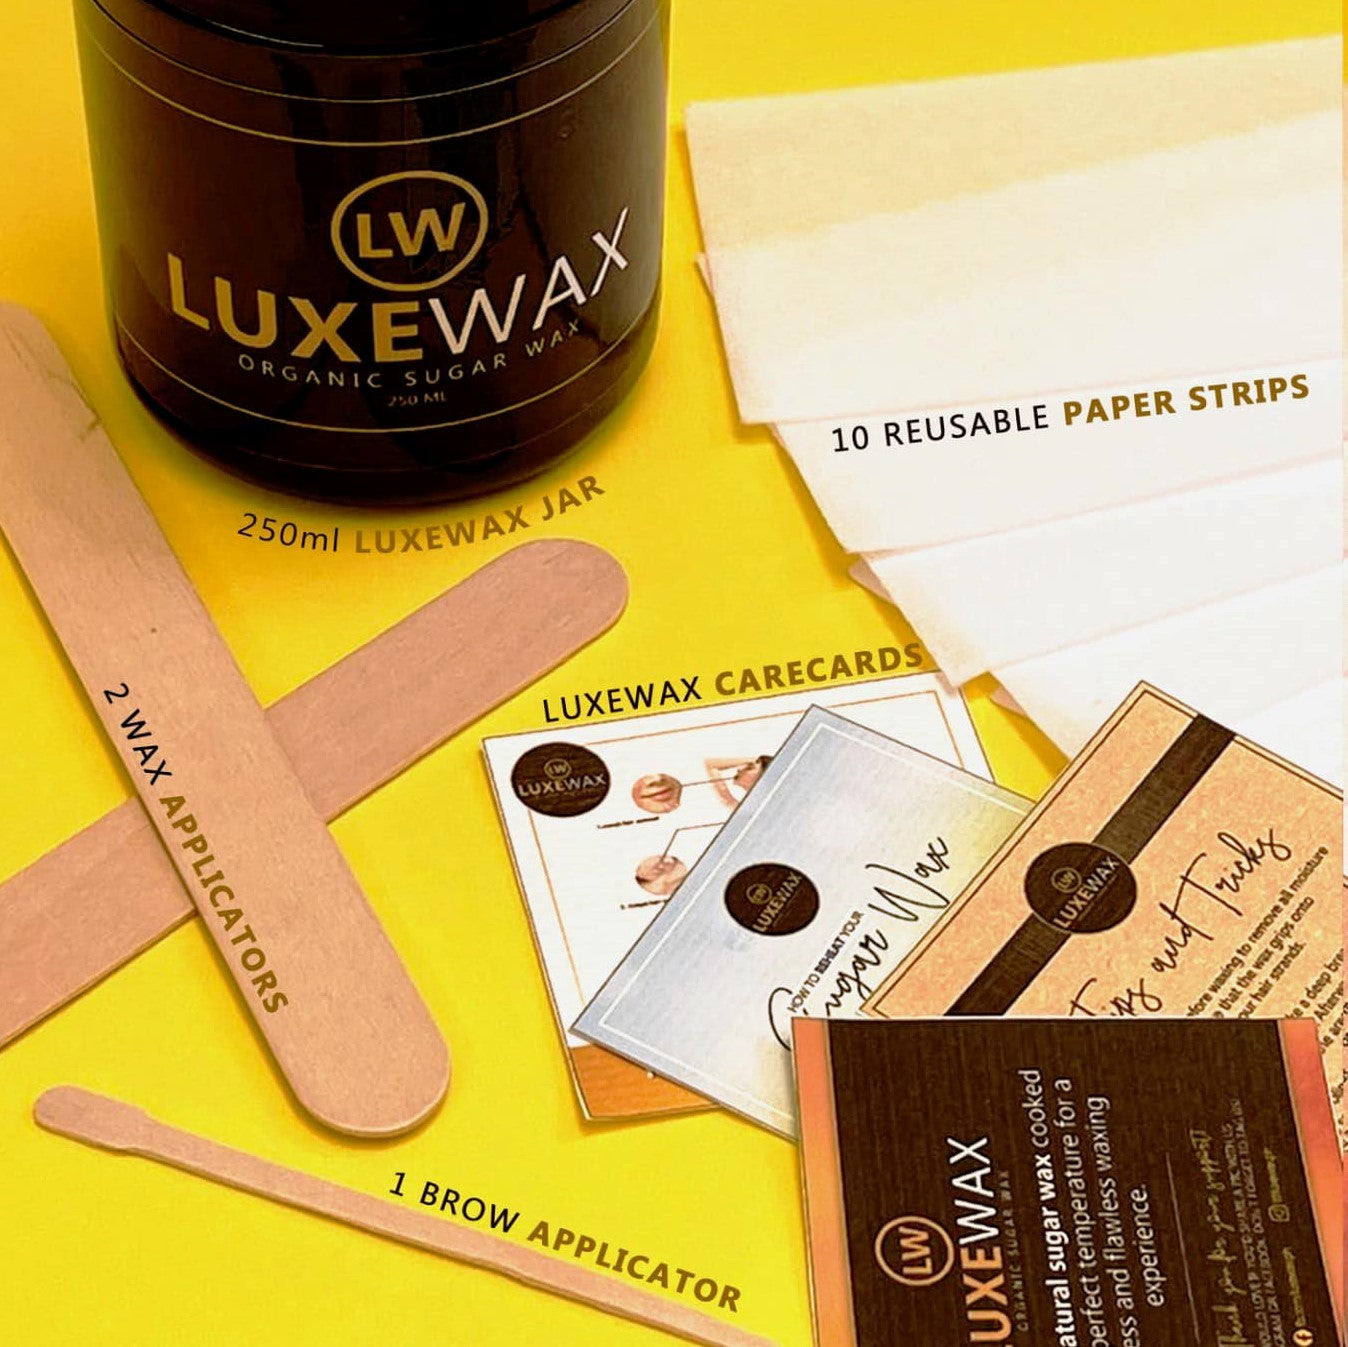 Luxewax Organic Sugar Wax Kit or Sunflower Oil (Jar, Wax & Brow Applicators, Strips, Care Card) (Authentic, Authorized Seller) Luxe Wax Sugar Wax Hair Removal DIY